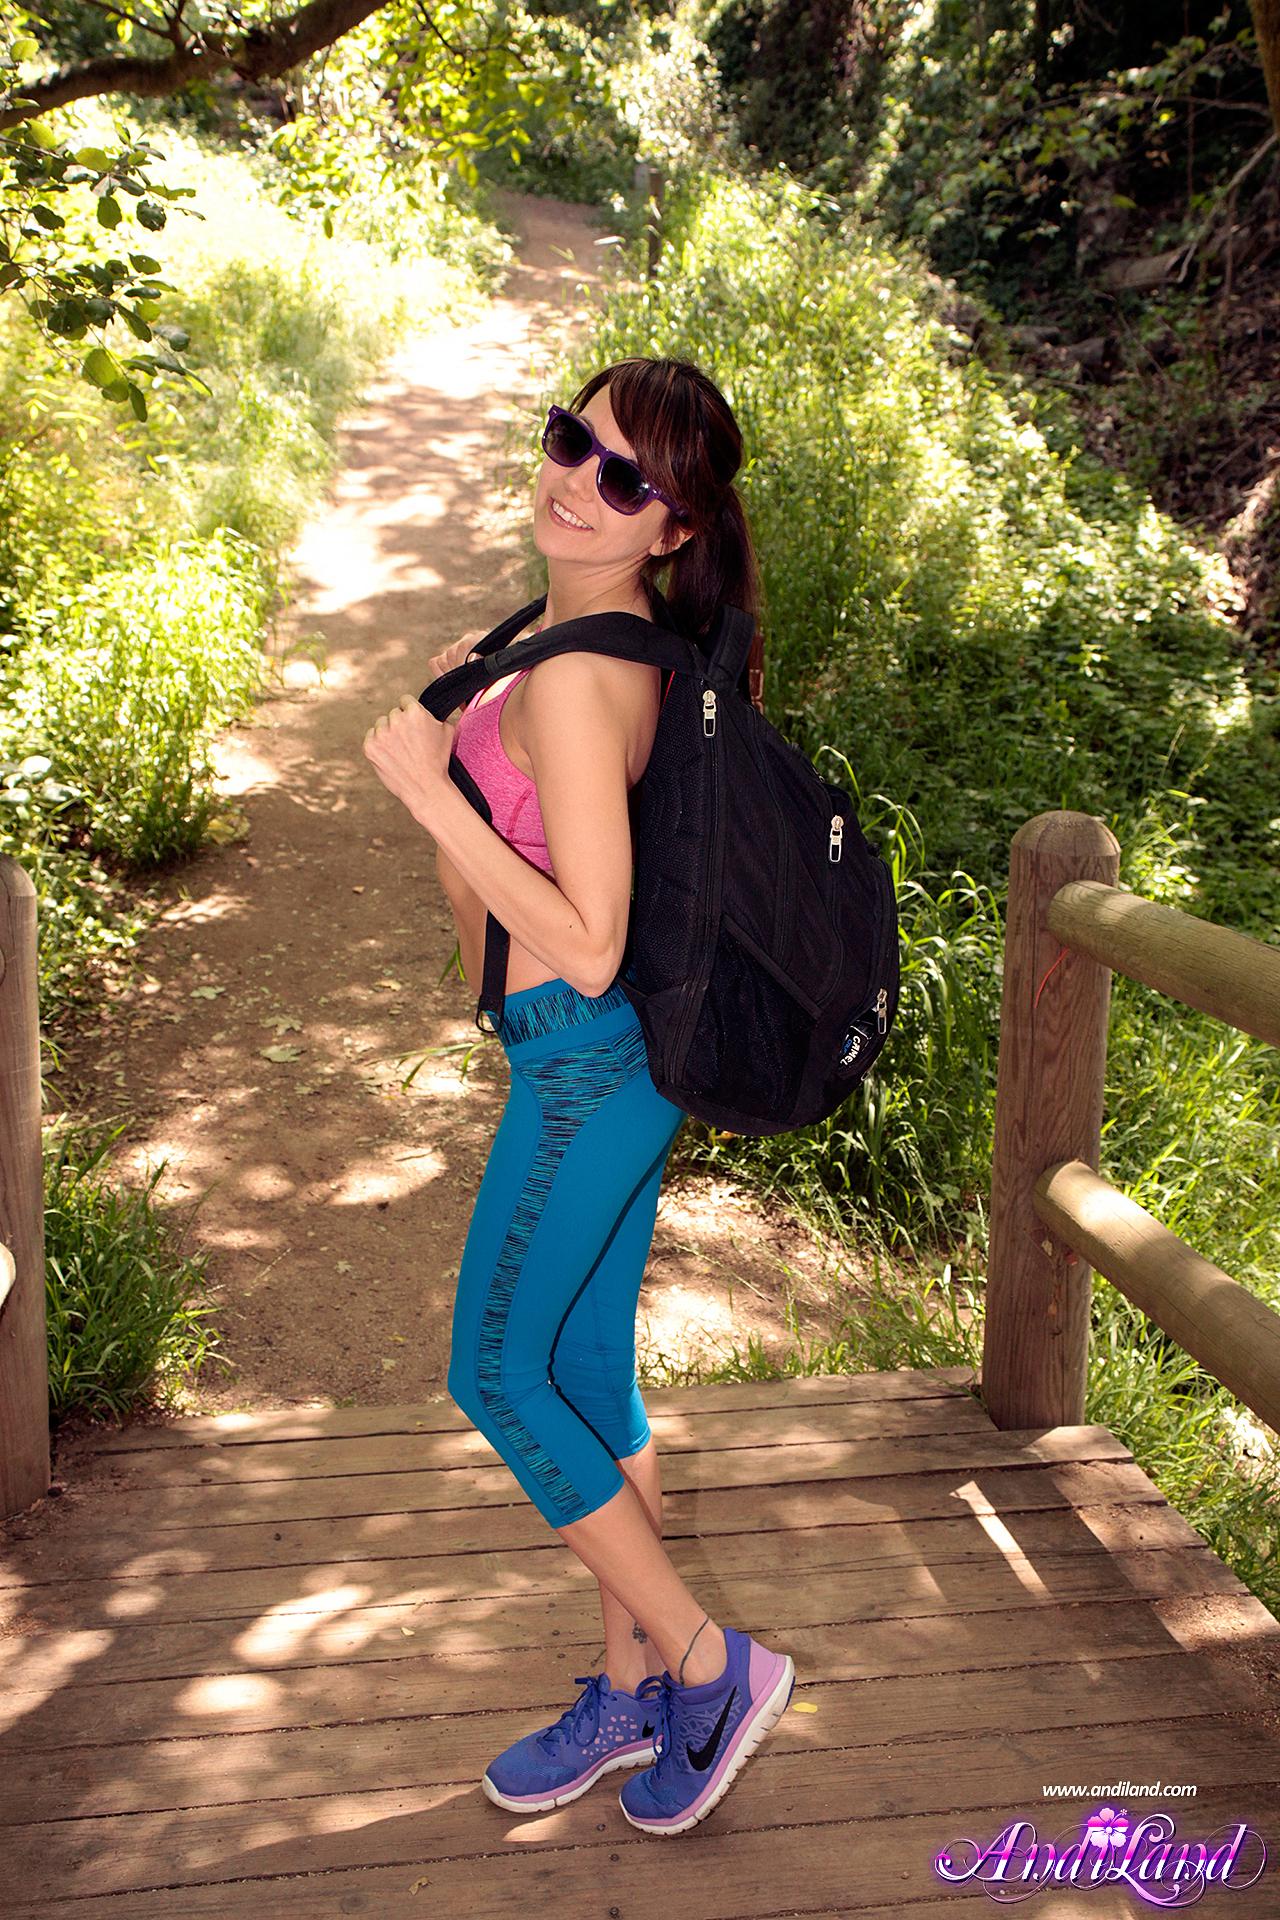 Brunette coed Andi flashes her tits and ass on a hiking trip #53133858